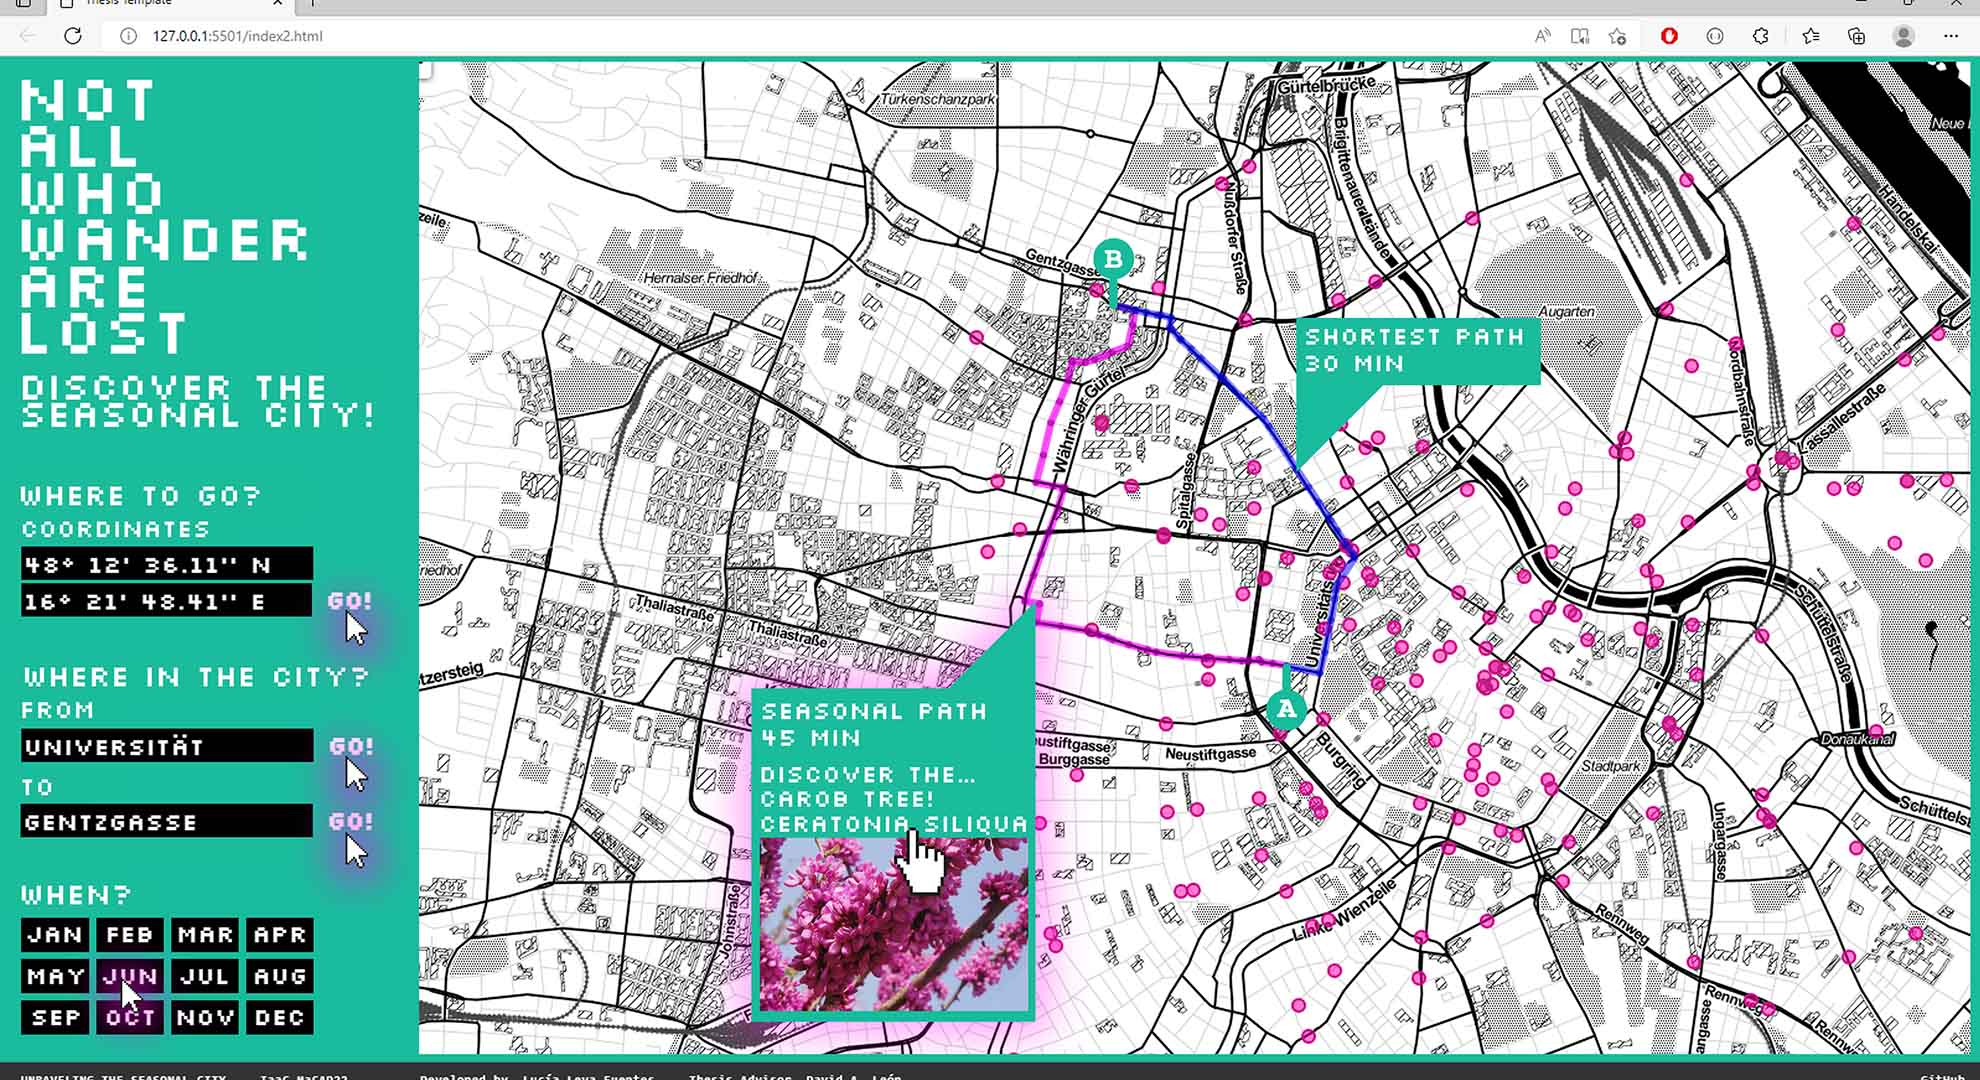 Seasonal City interface melding innovation and mapping to navigate seasonal urban routes.